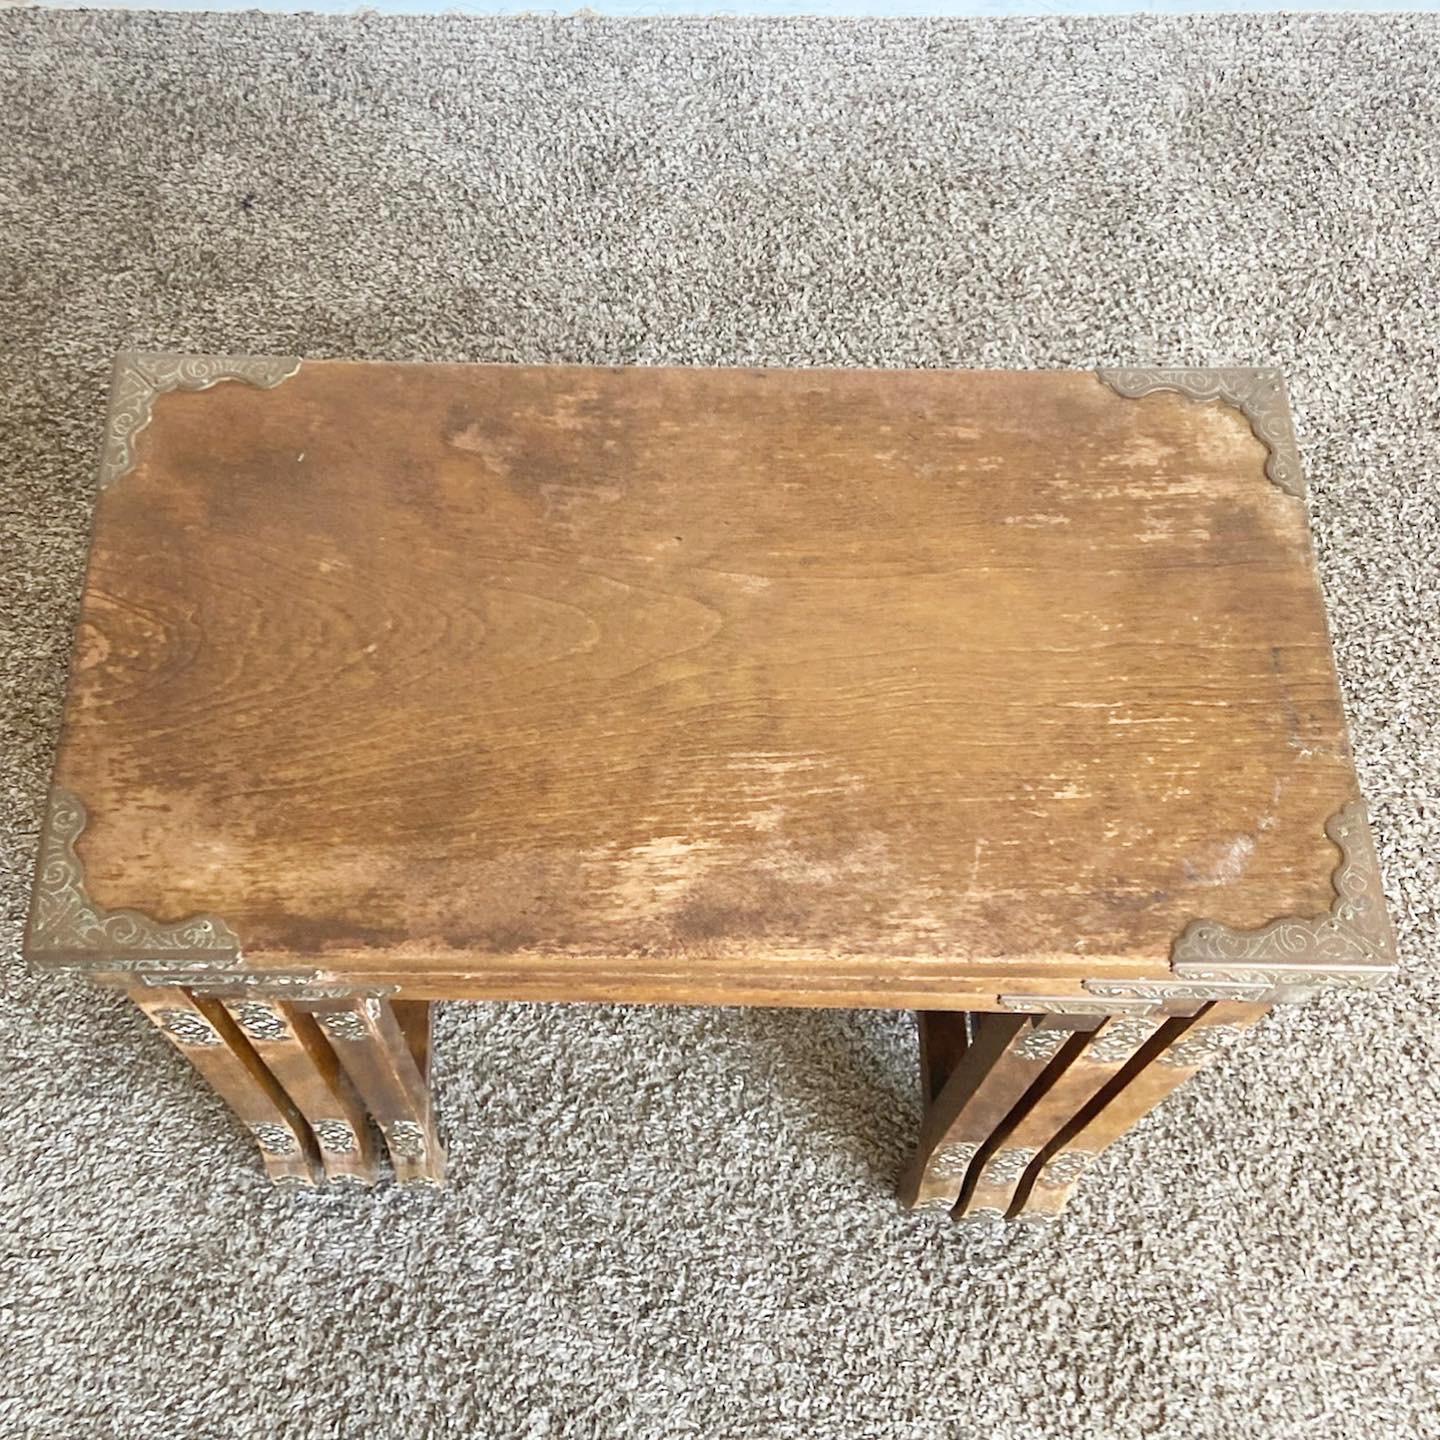 Japanese Wooden Nesting Tables With Brass Accents - Set of 3 In Good Condition For Sale In Delray Beach, FL